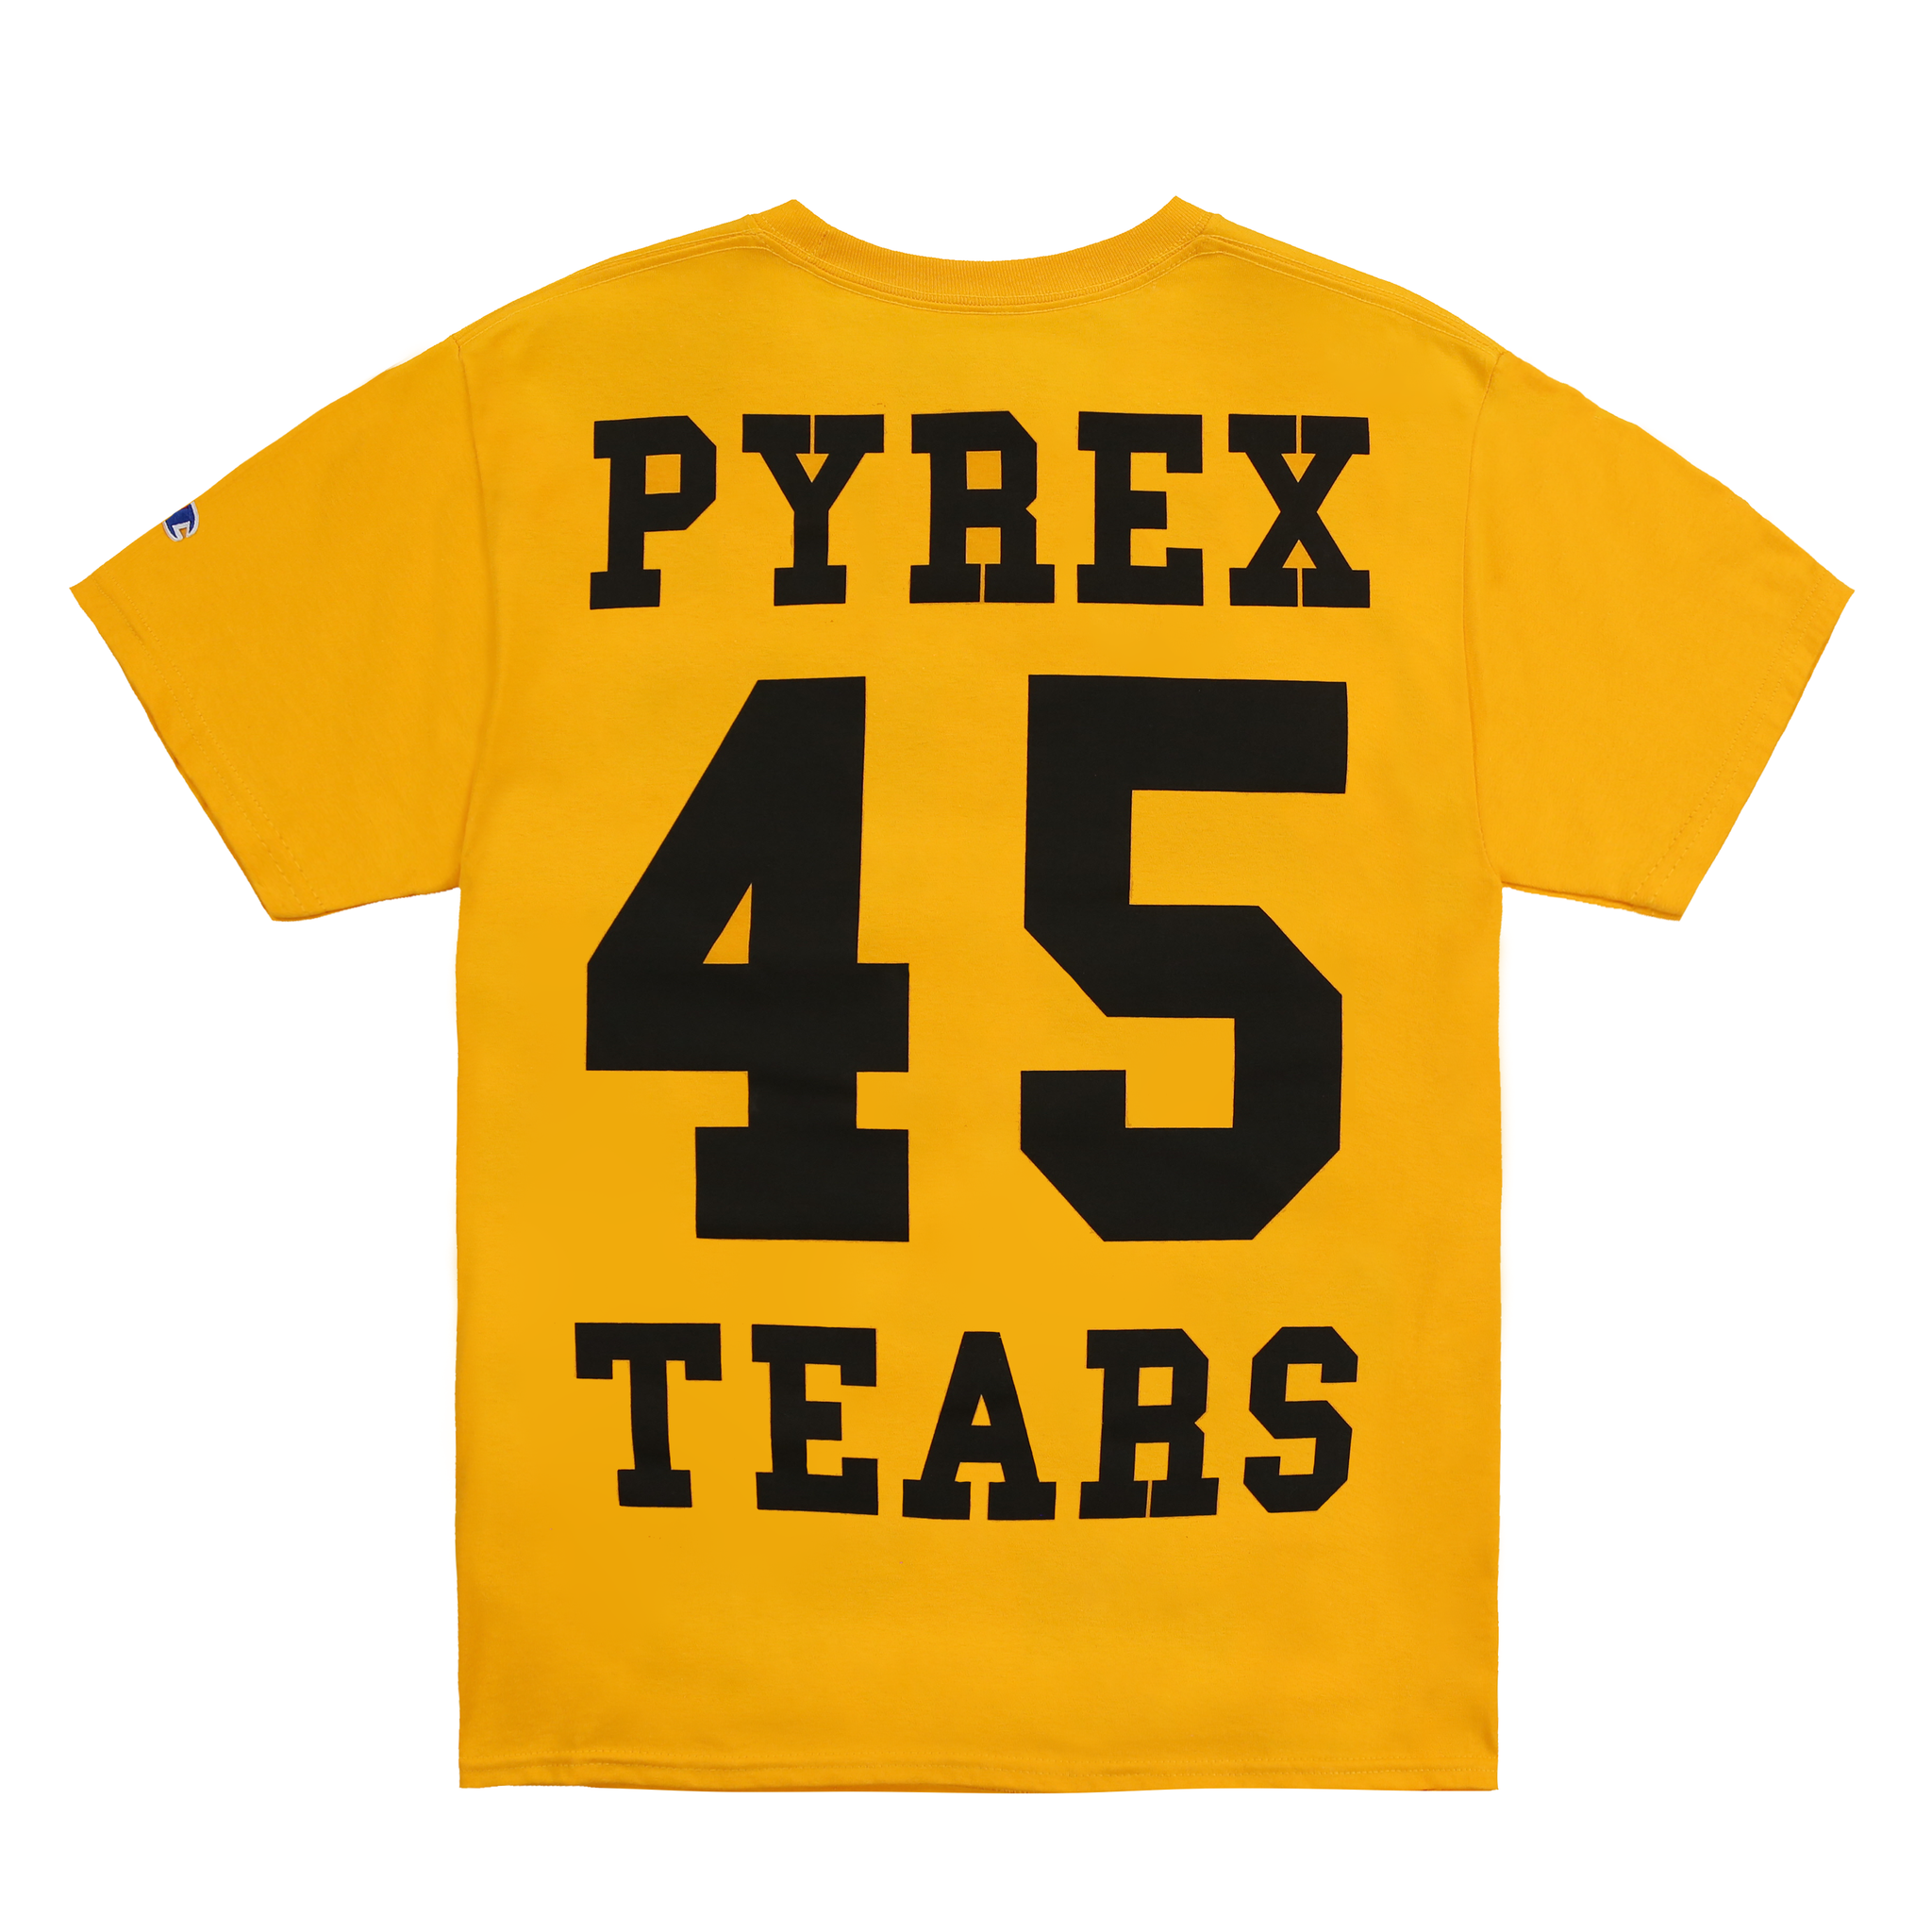 PYREX TEARS T-SHIRT – Canary Yellow